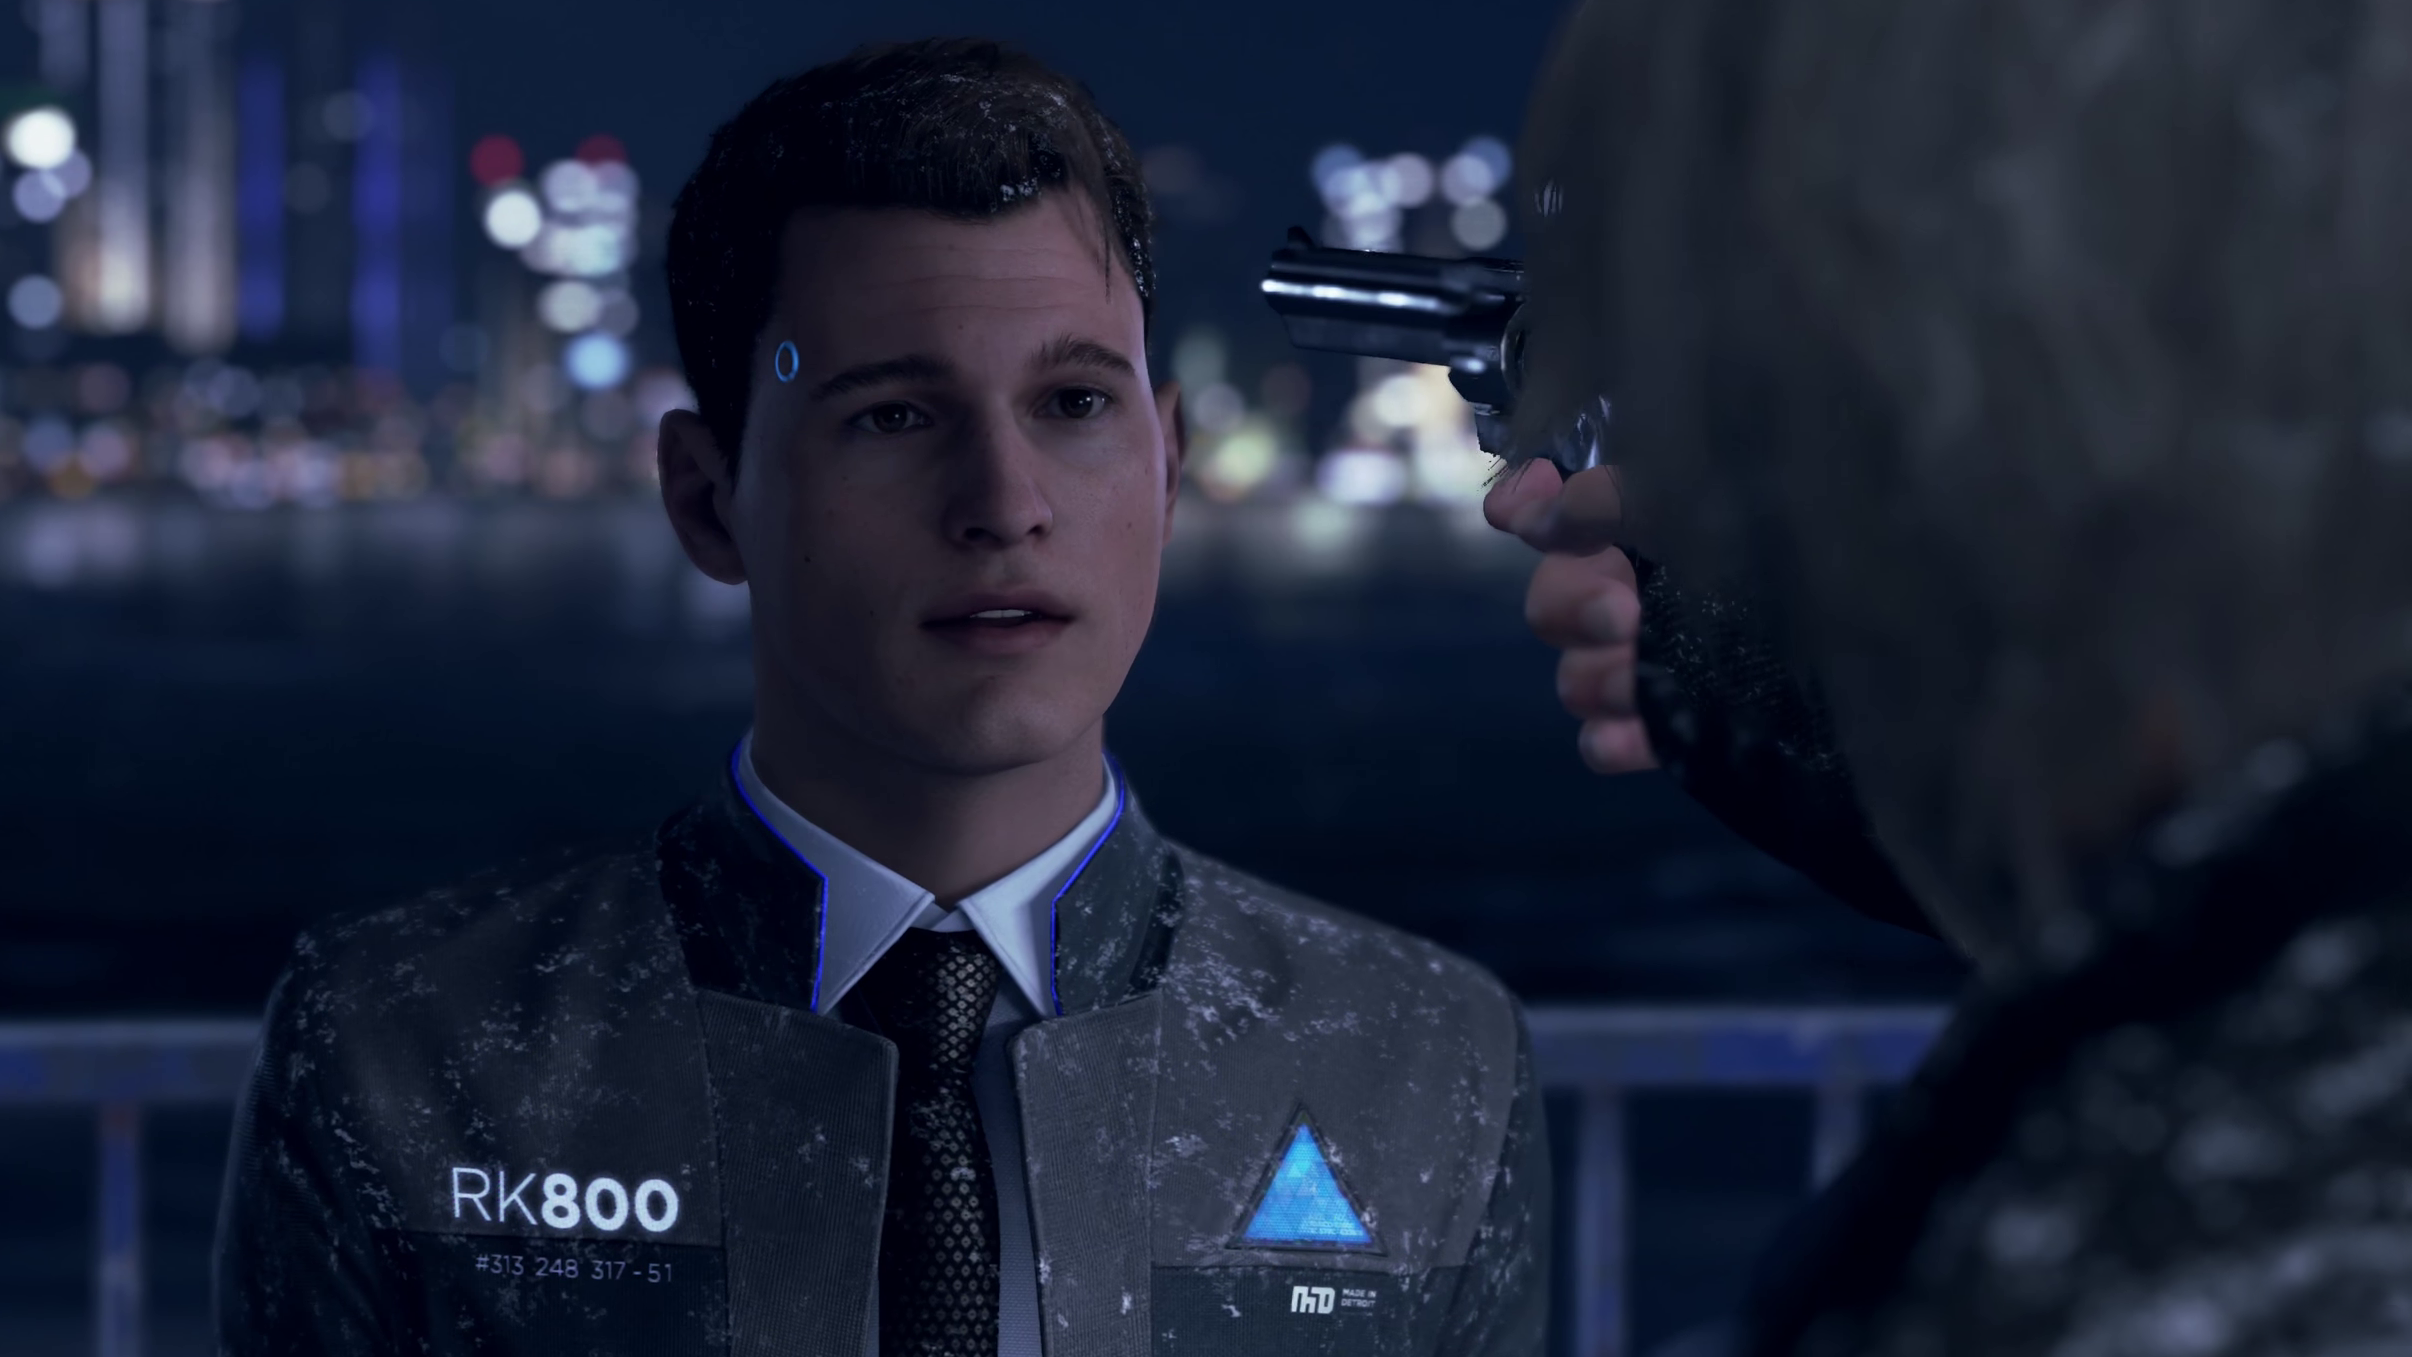 best of video games on X: connor — detroit: become human https